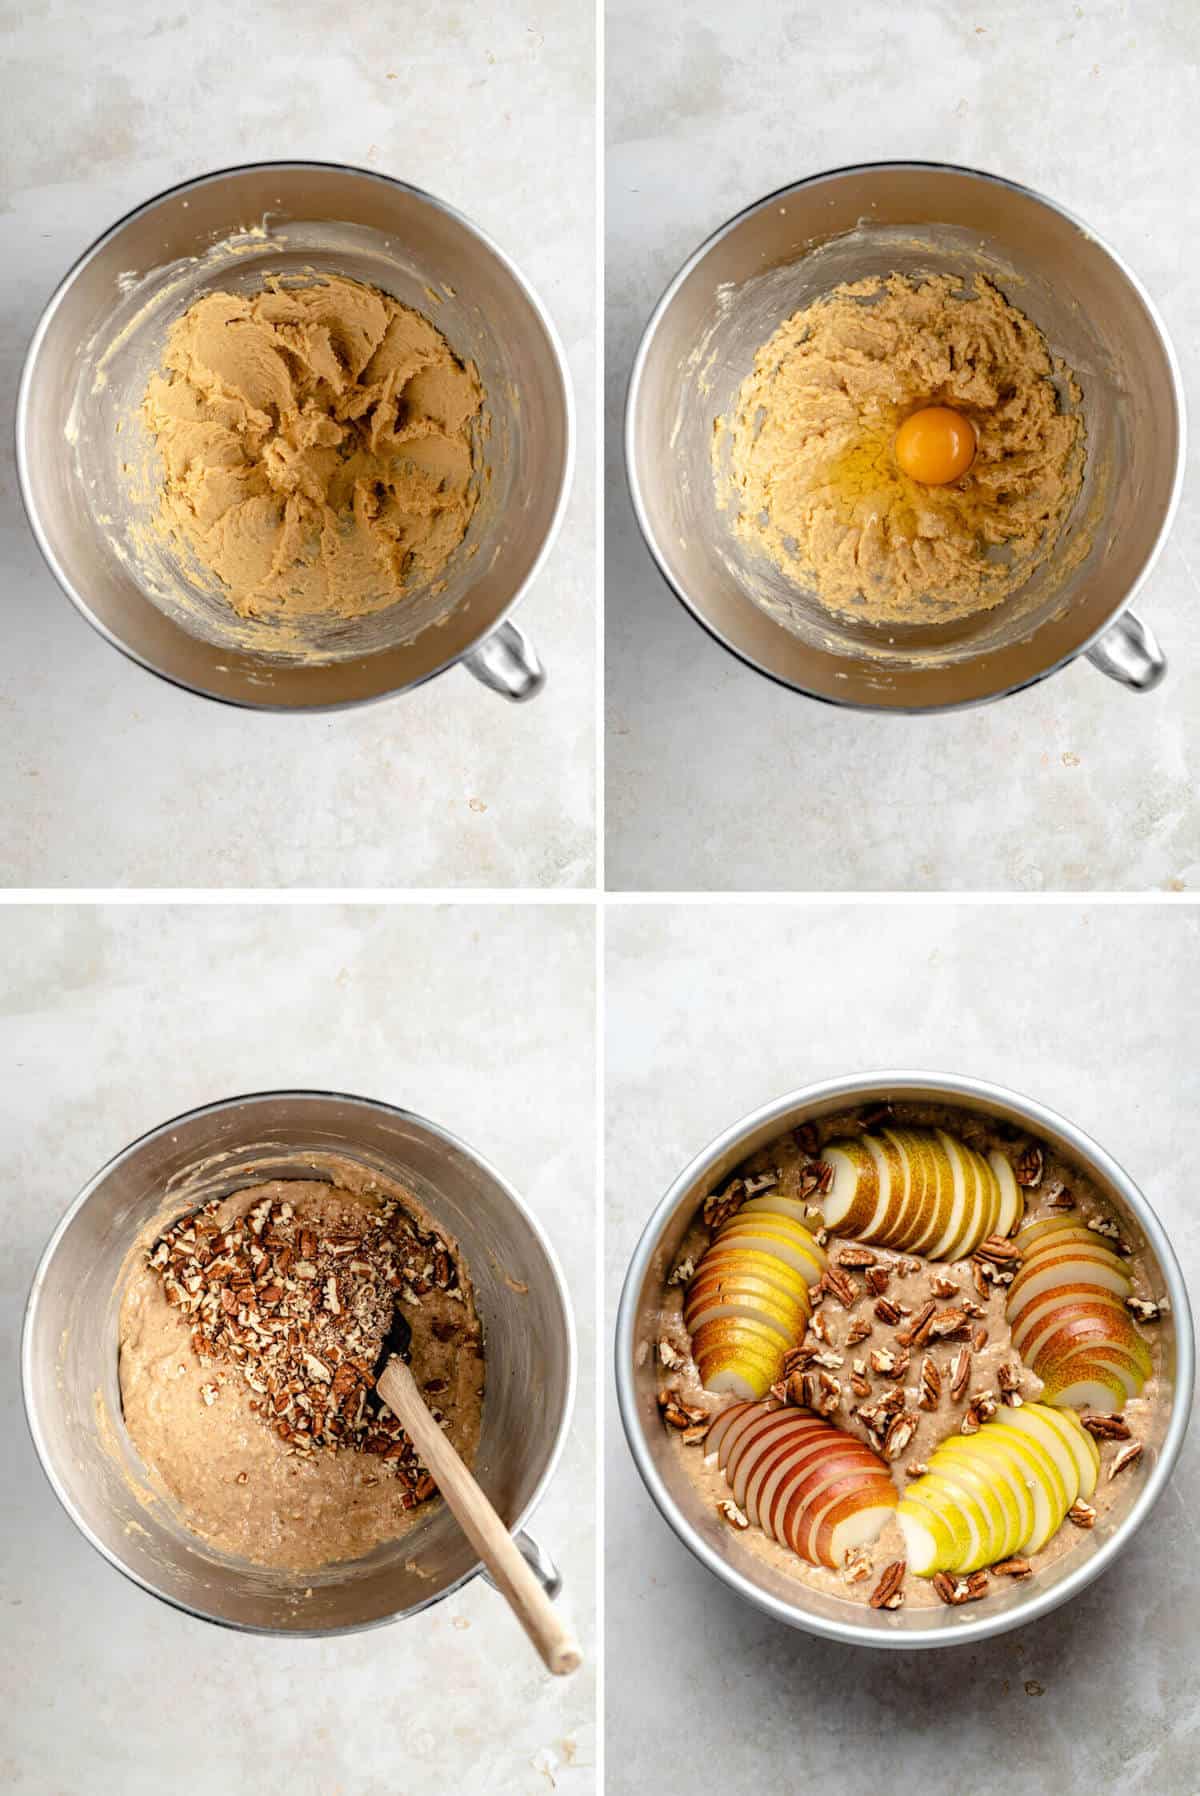 Process steps of making the pear cake batter and it in a cake tin before baking.